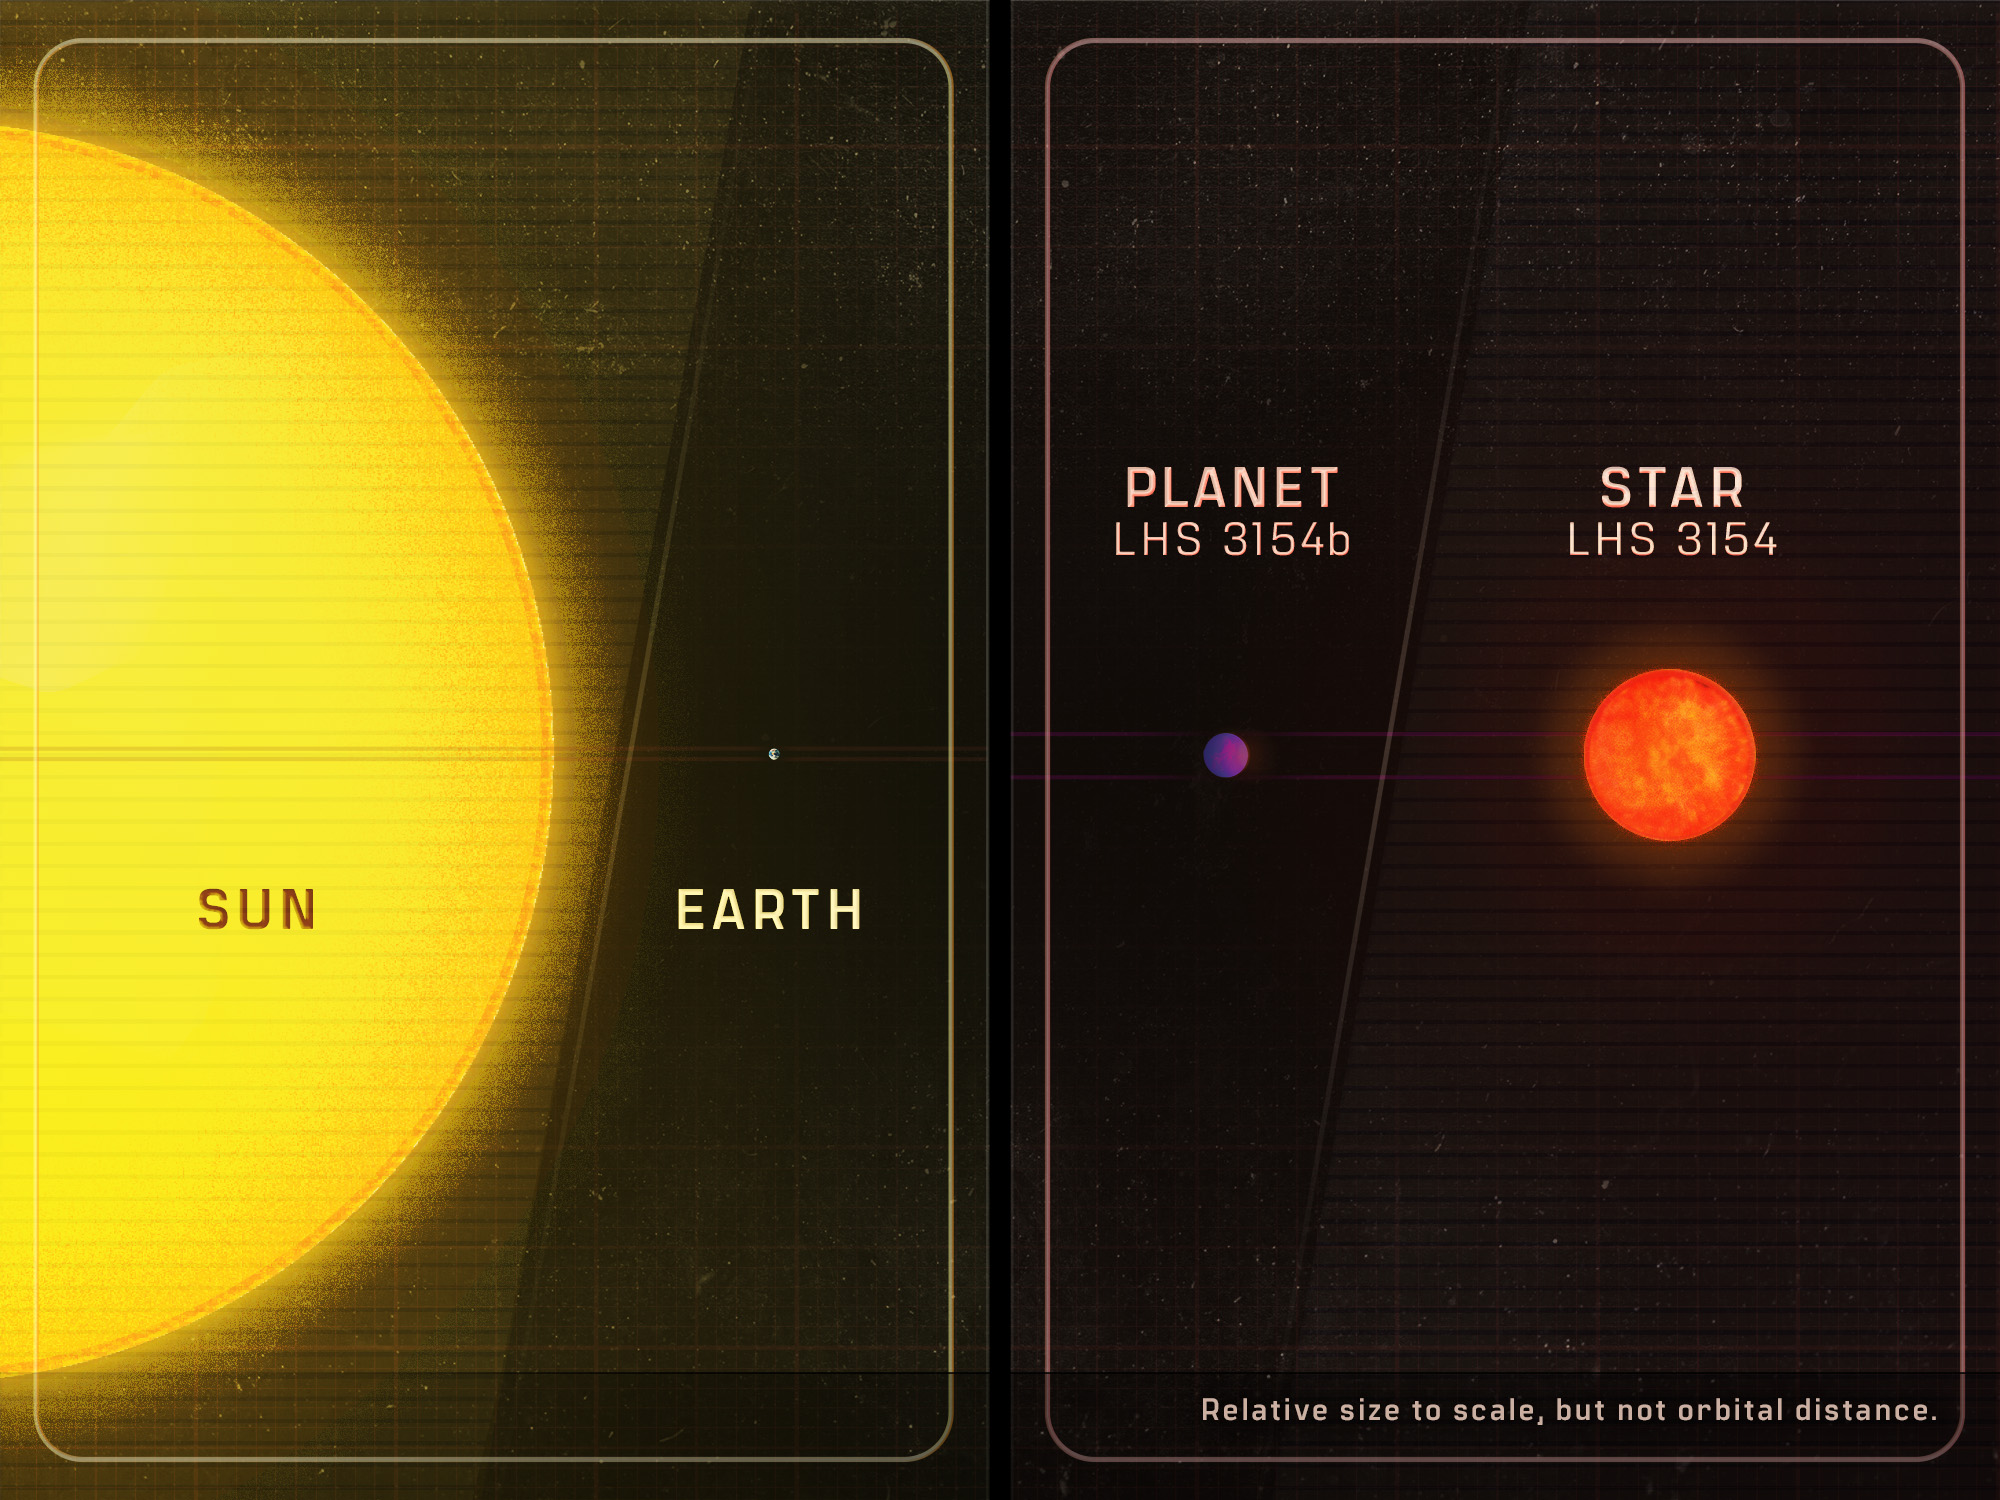 An artistic rendering of the mass comparison of LHS 3154 system and our own Earth and sun